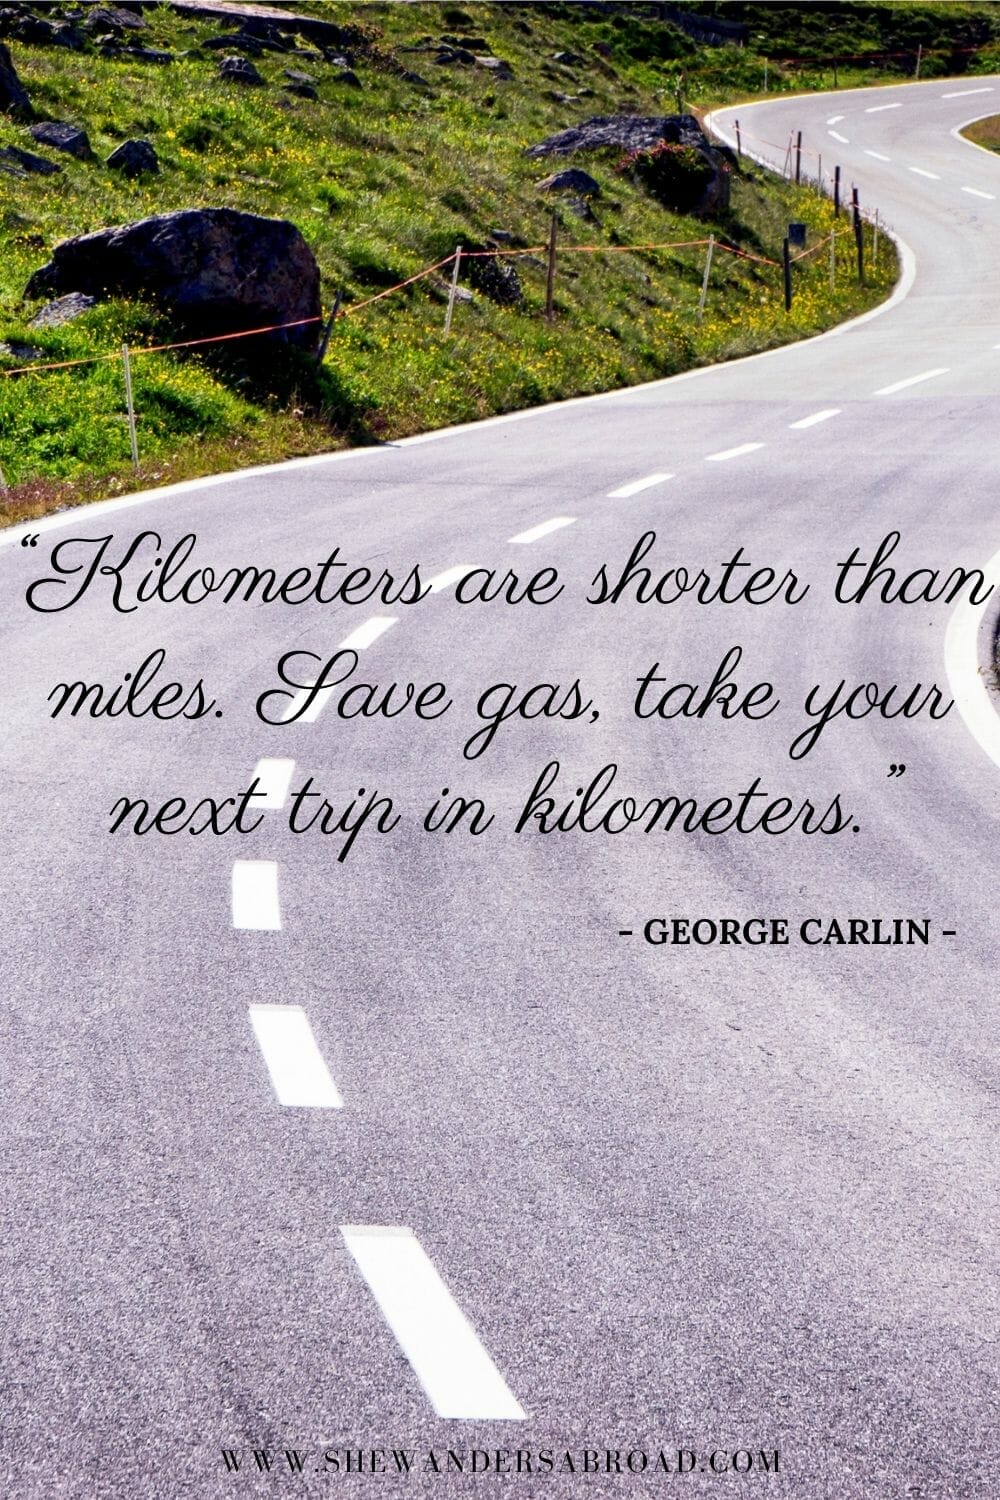 Funny quotes about road trips